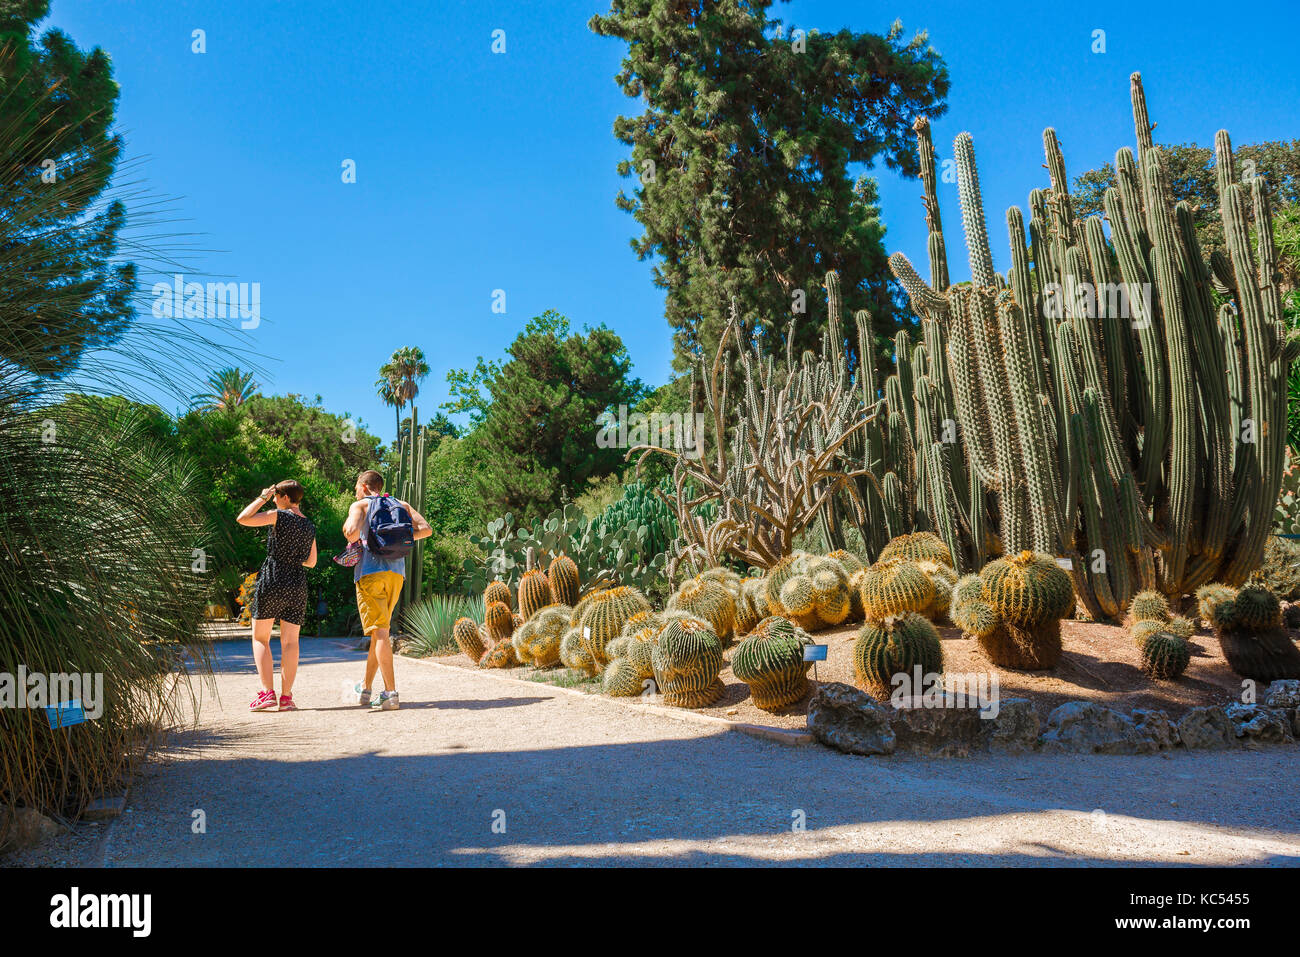 Valencia Spain botanical garden, rear view of a young couple visiting the desert plants area of the Jardin Botanico in Valencia, Spain Stock Photo